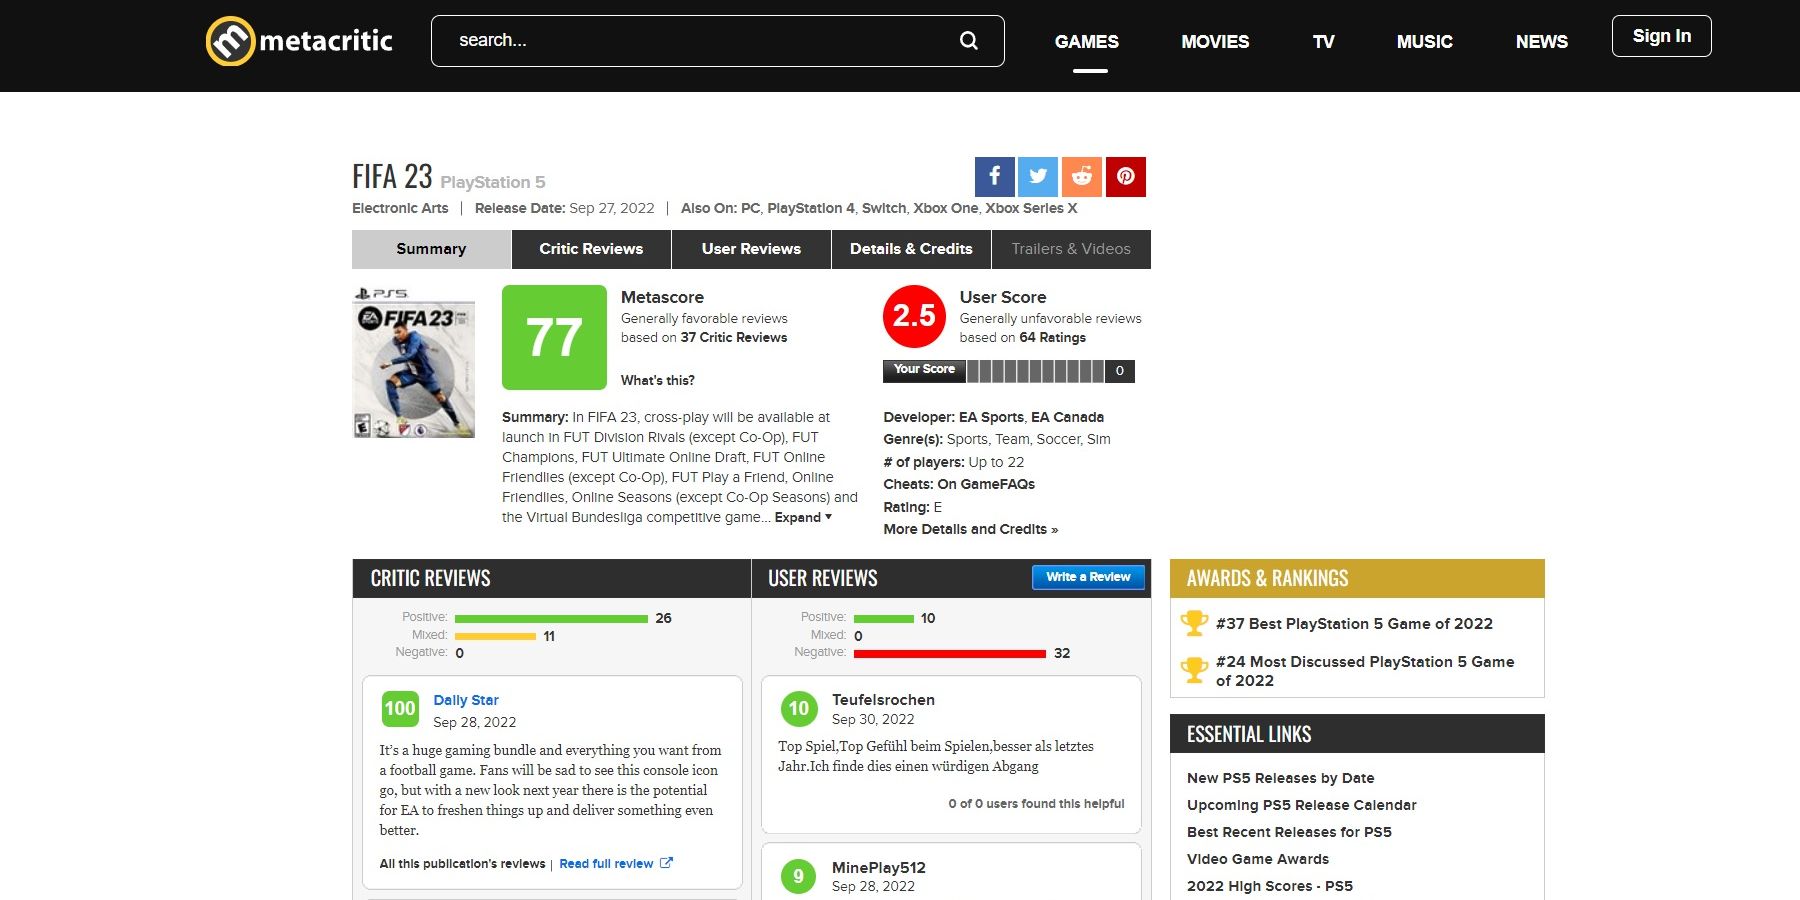 fifa-23-review-bombed-metacritic-1